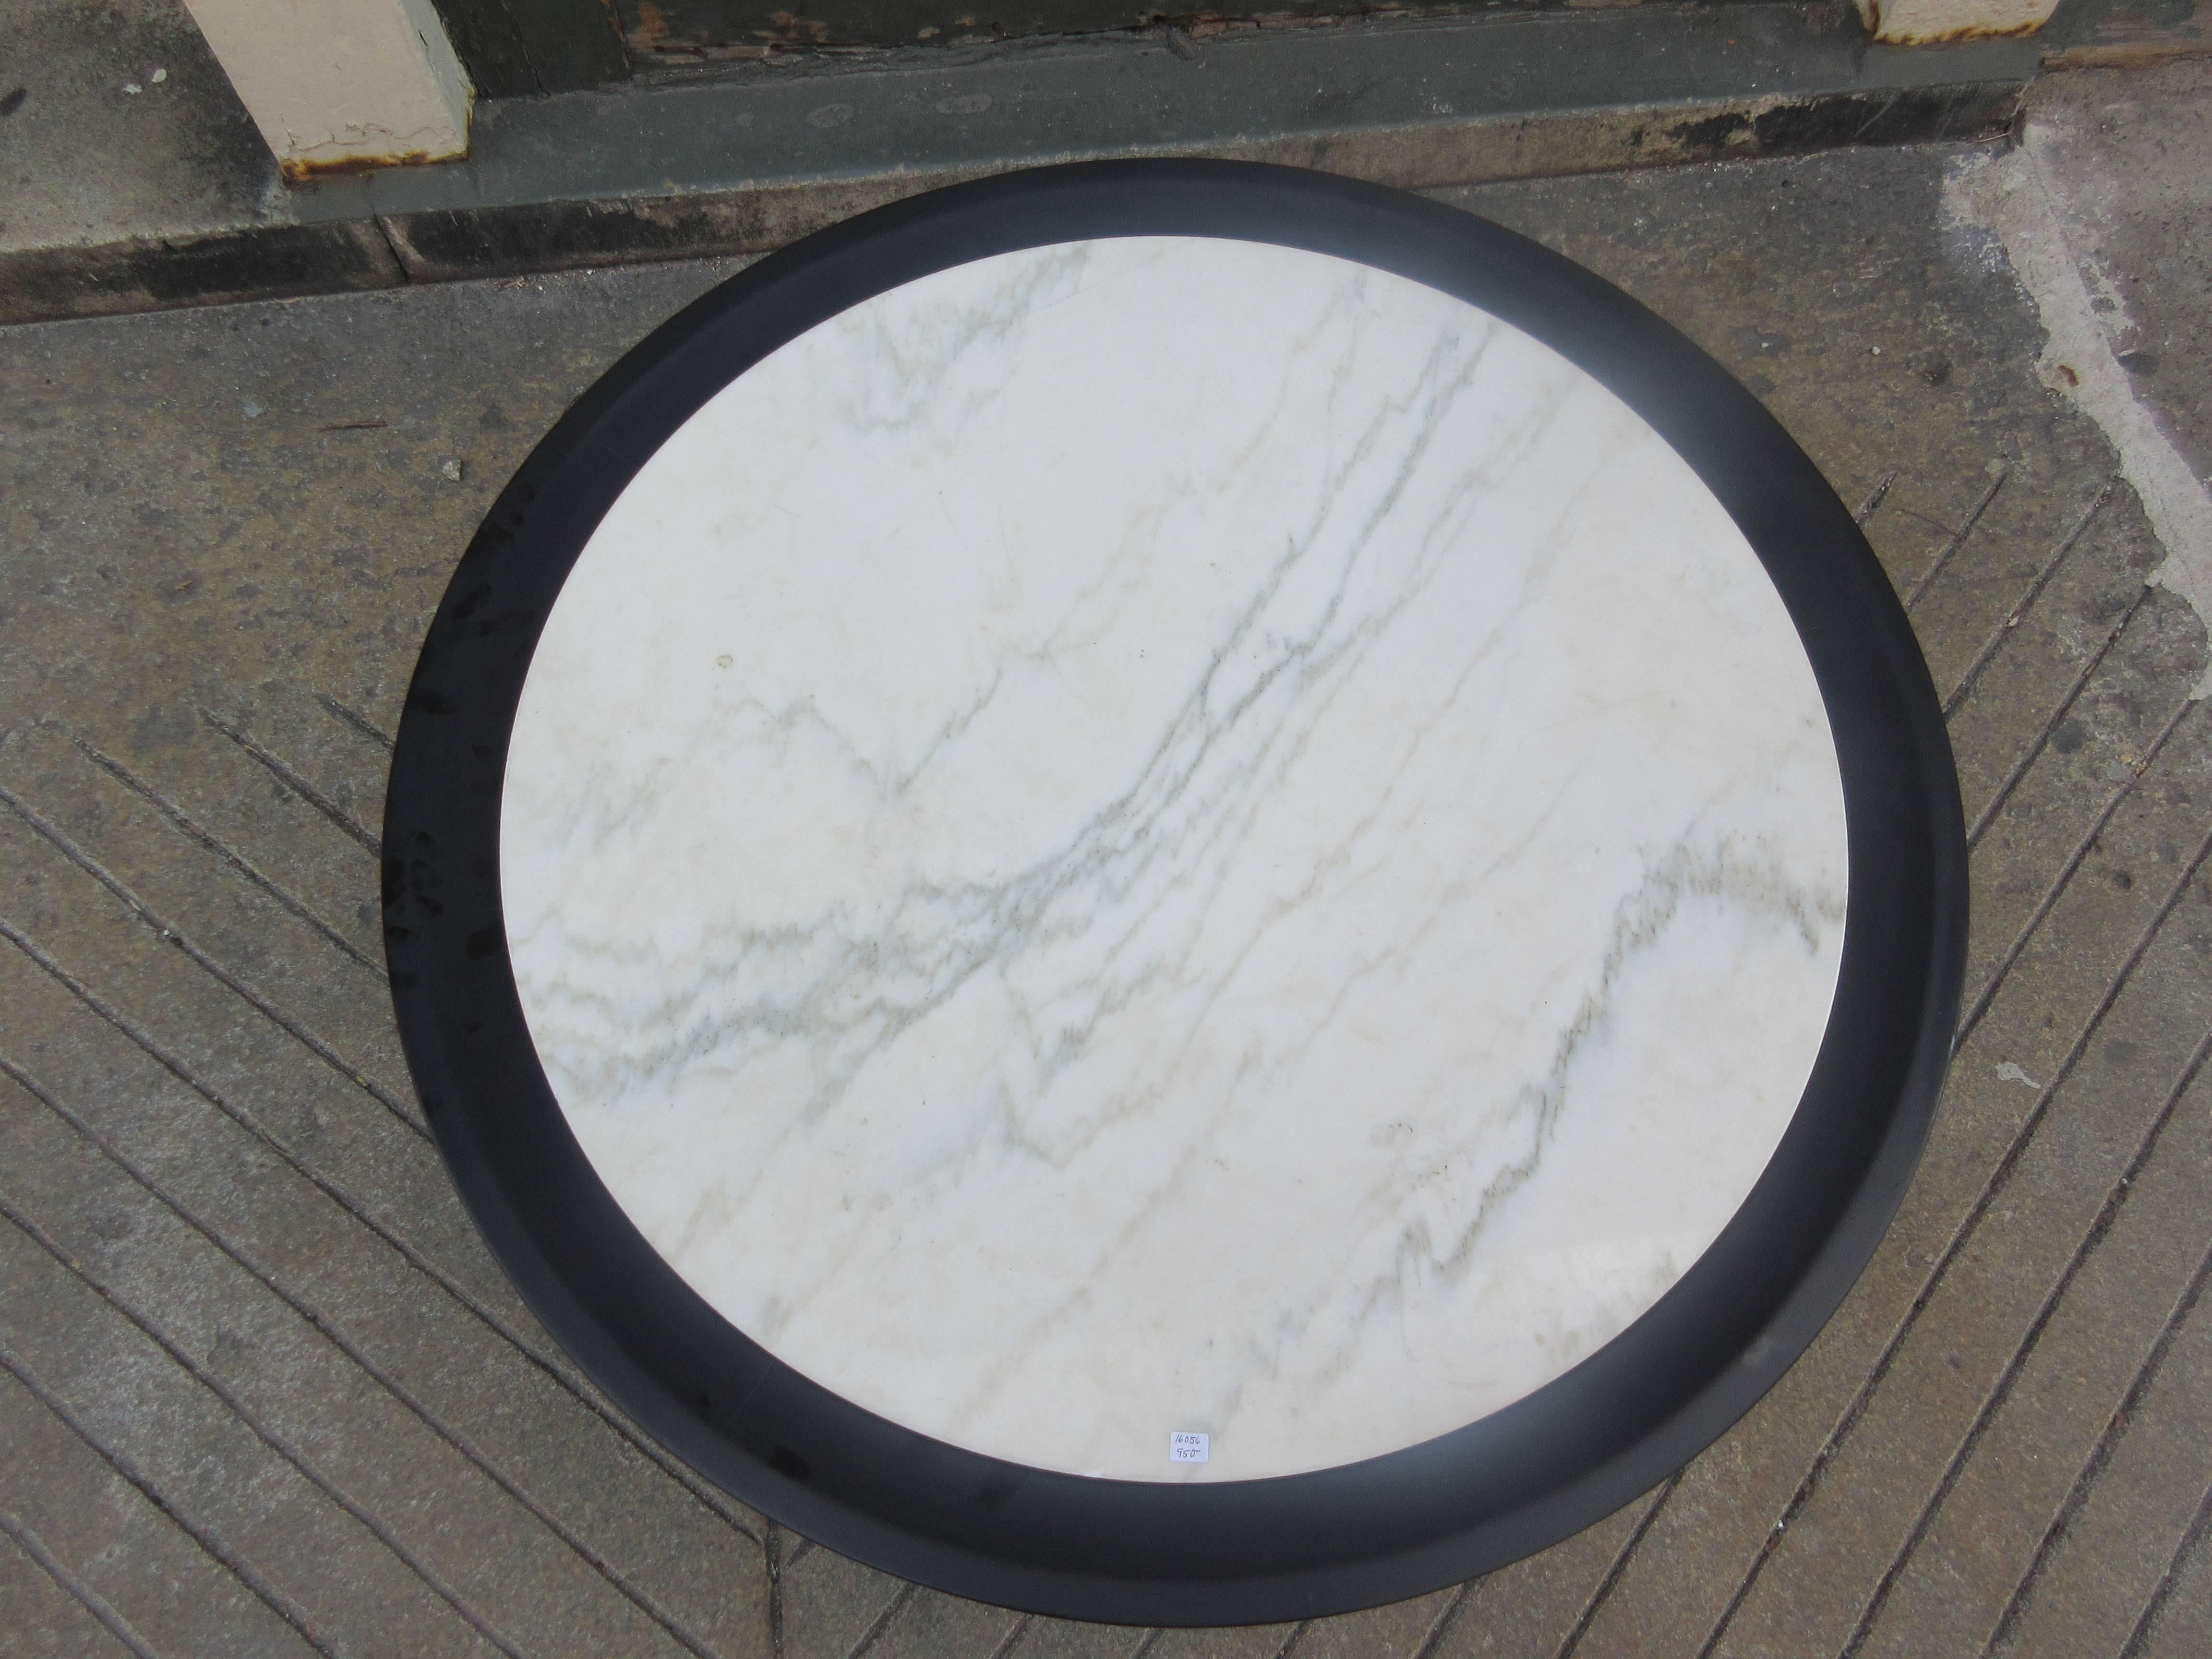 Warsaw Furniture Company 1950s round marble topped coffee table in the Chinese style. Wood is a satin black with white Carrara marble inserted in a fluted rim.